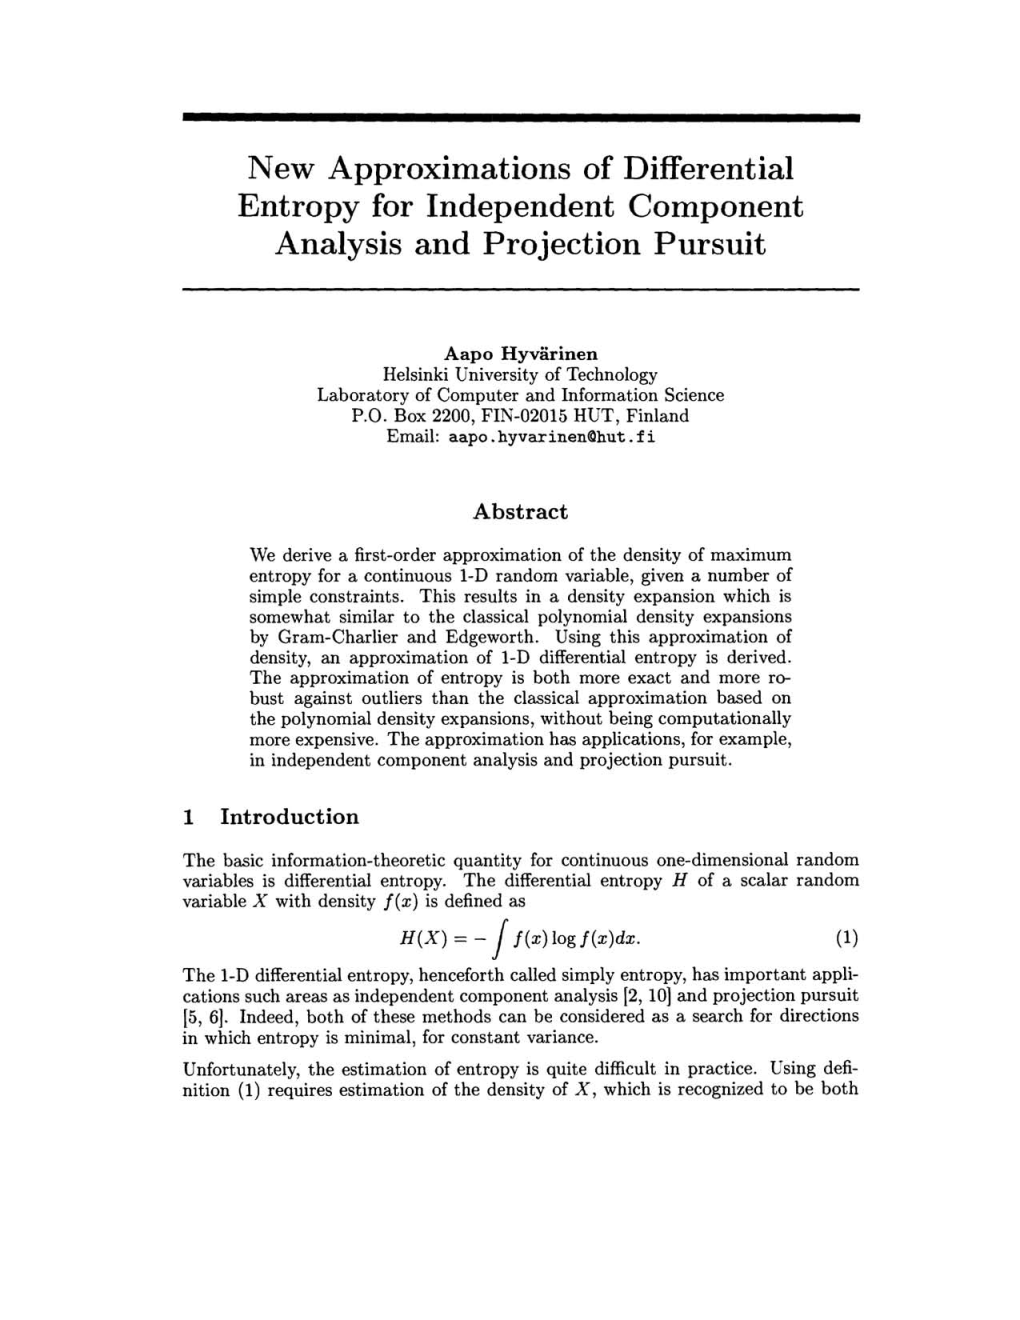 New Approximations of Differential Entropy for Independent Component Analysis and Projection Pursuit